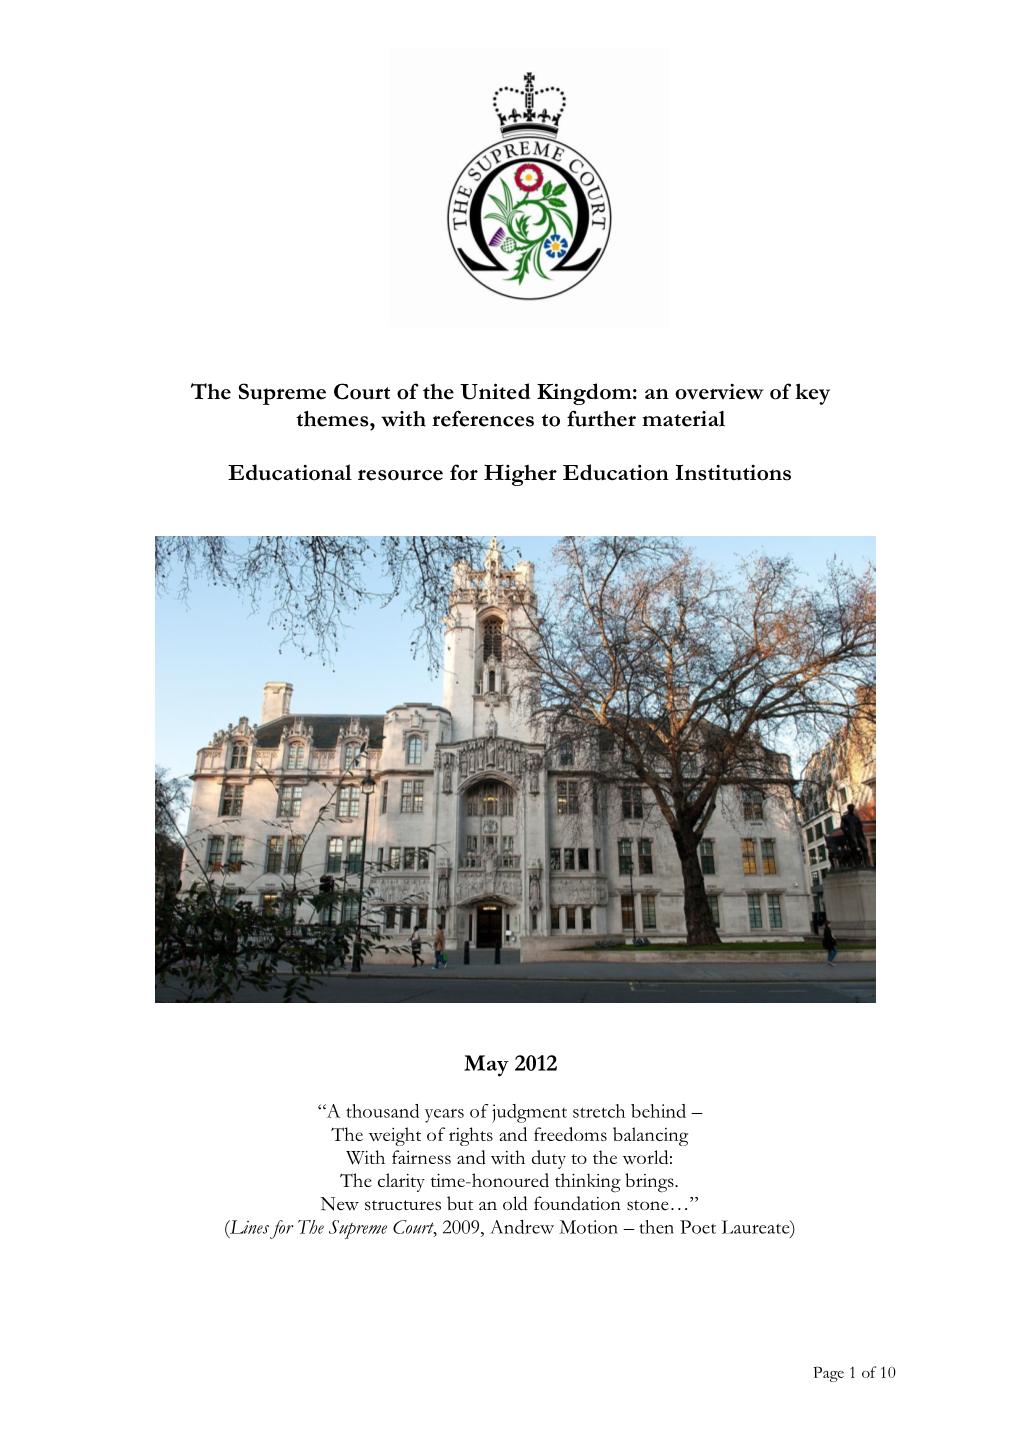 The Supreme Court of the United Kingdom: an Overview of Key Themes, with References to Further Material